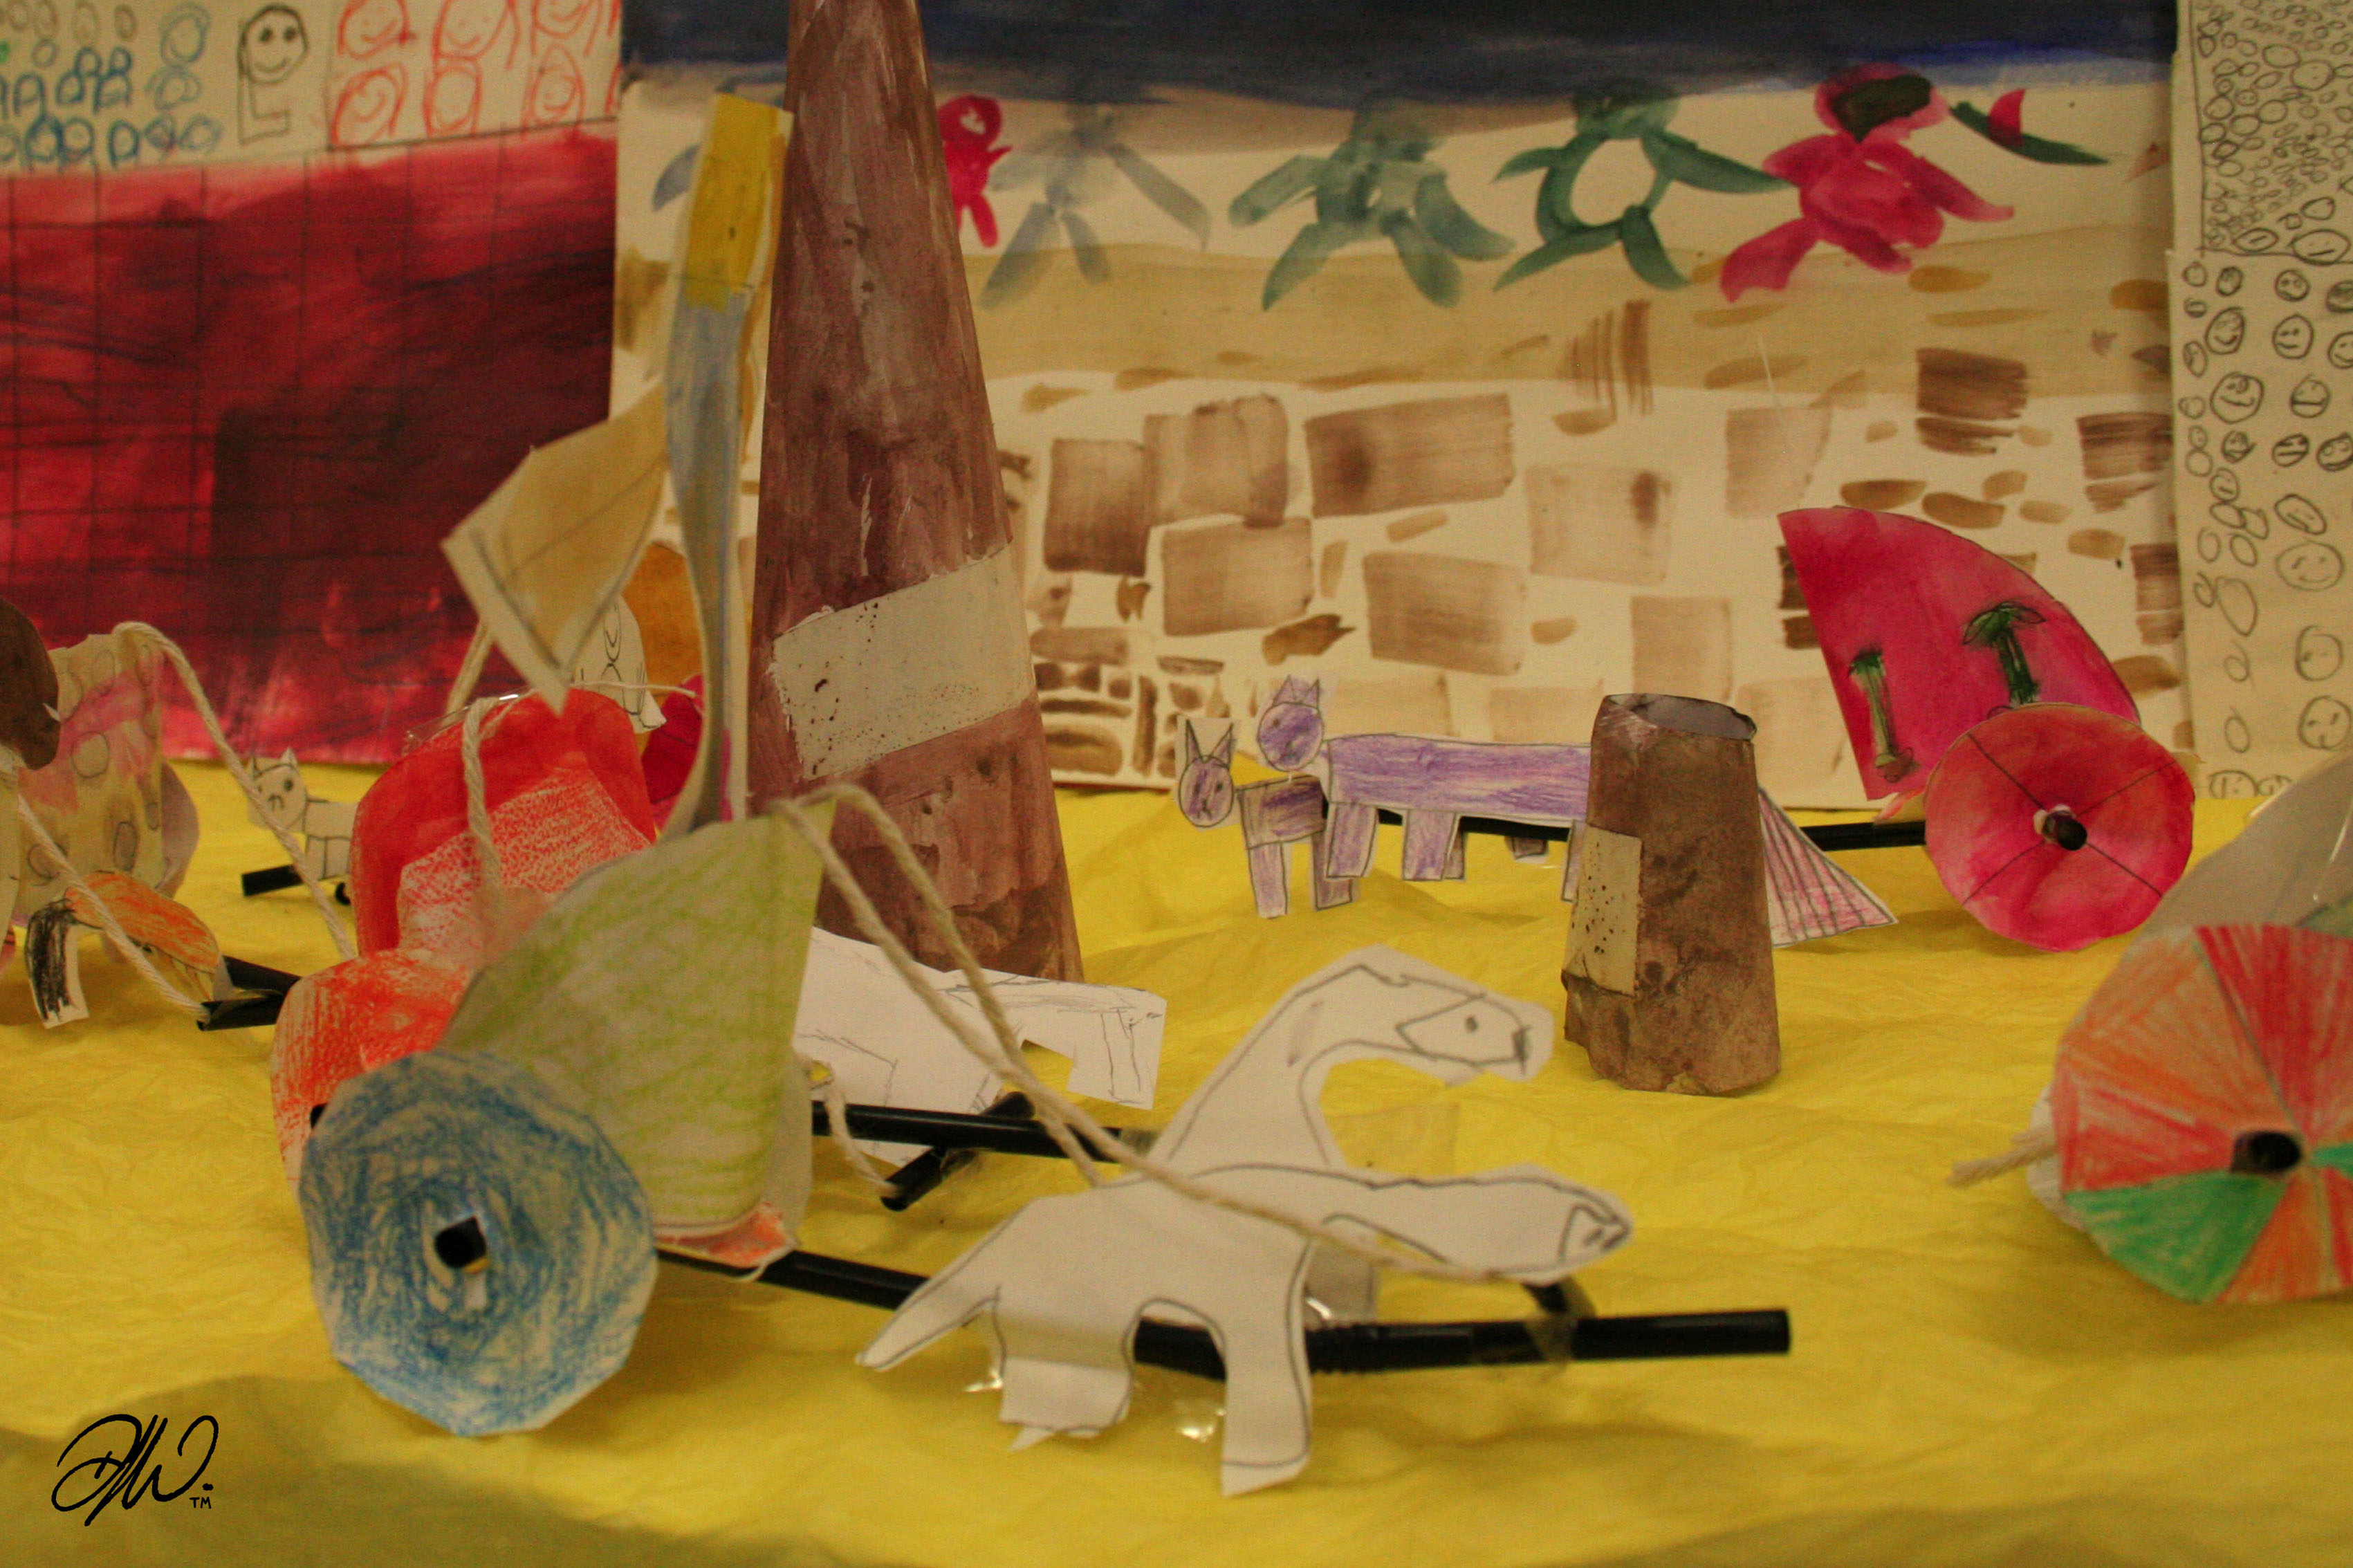 <b>Whinstone Primary School Year 3</b> - Circus Maximus Arena with Illustrated Chariot Models - 4 of 7